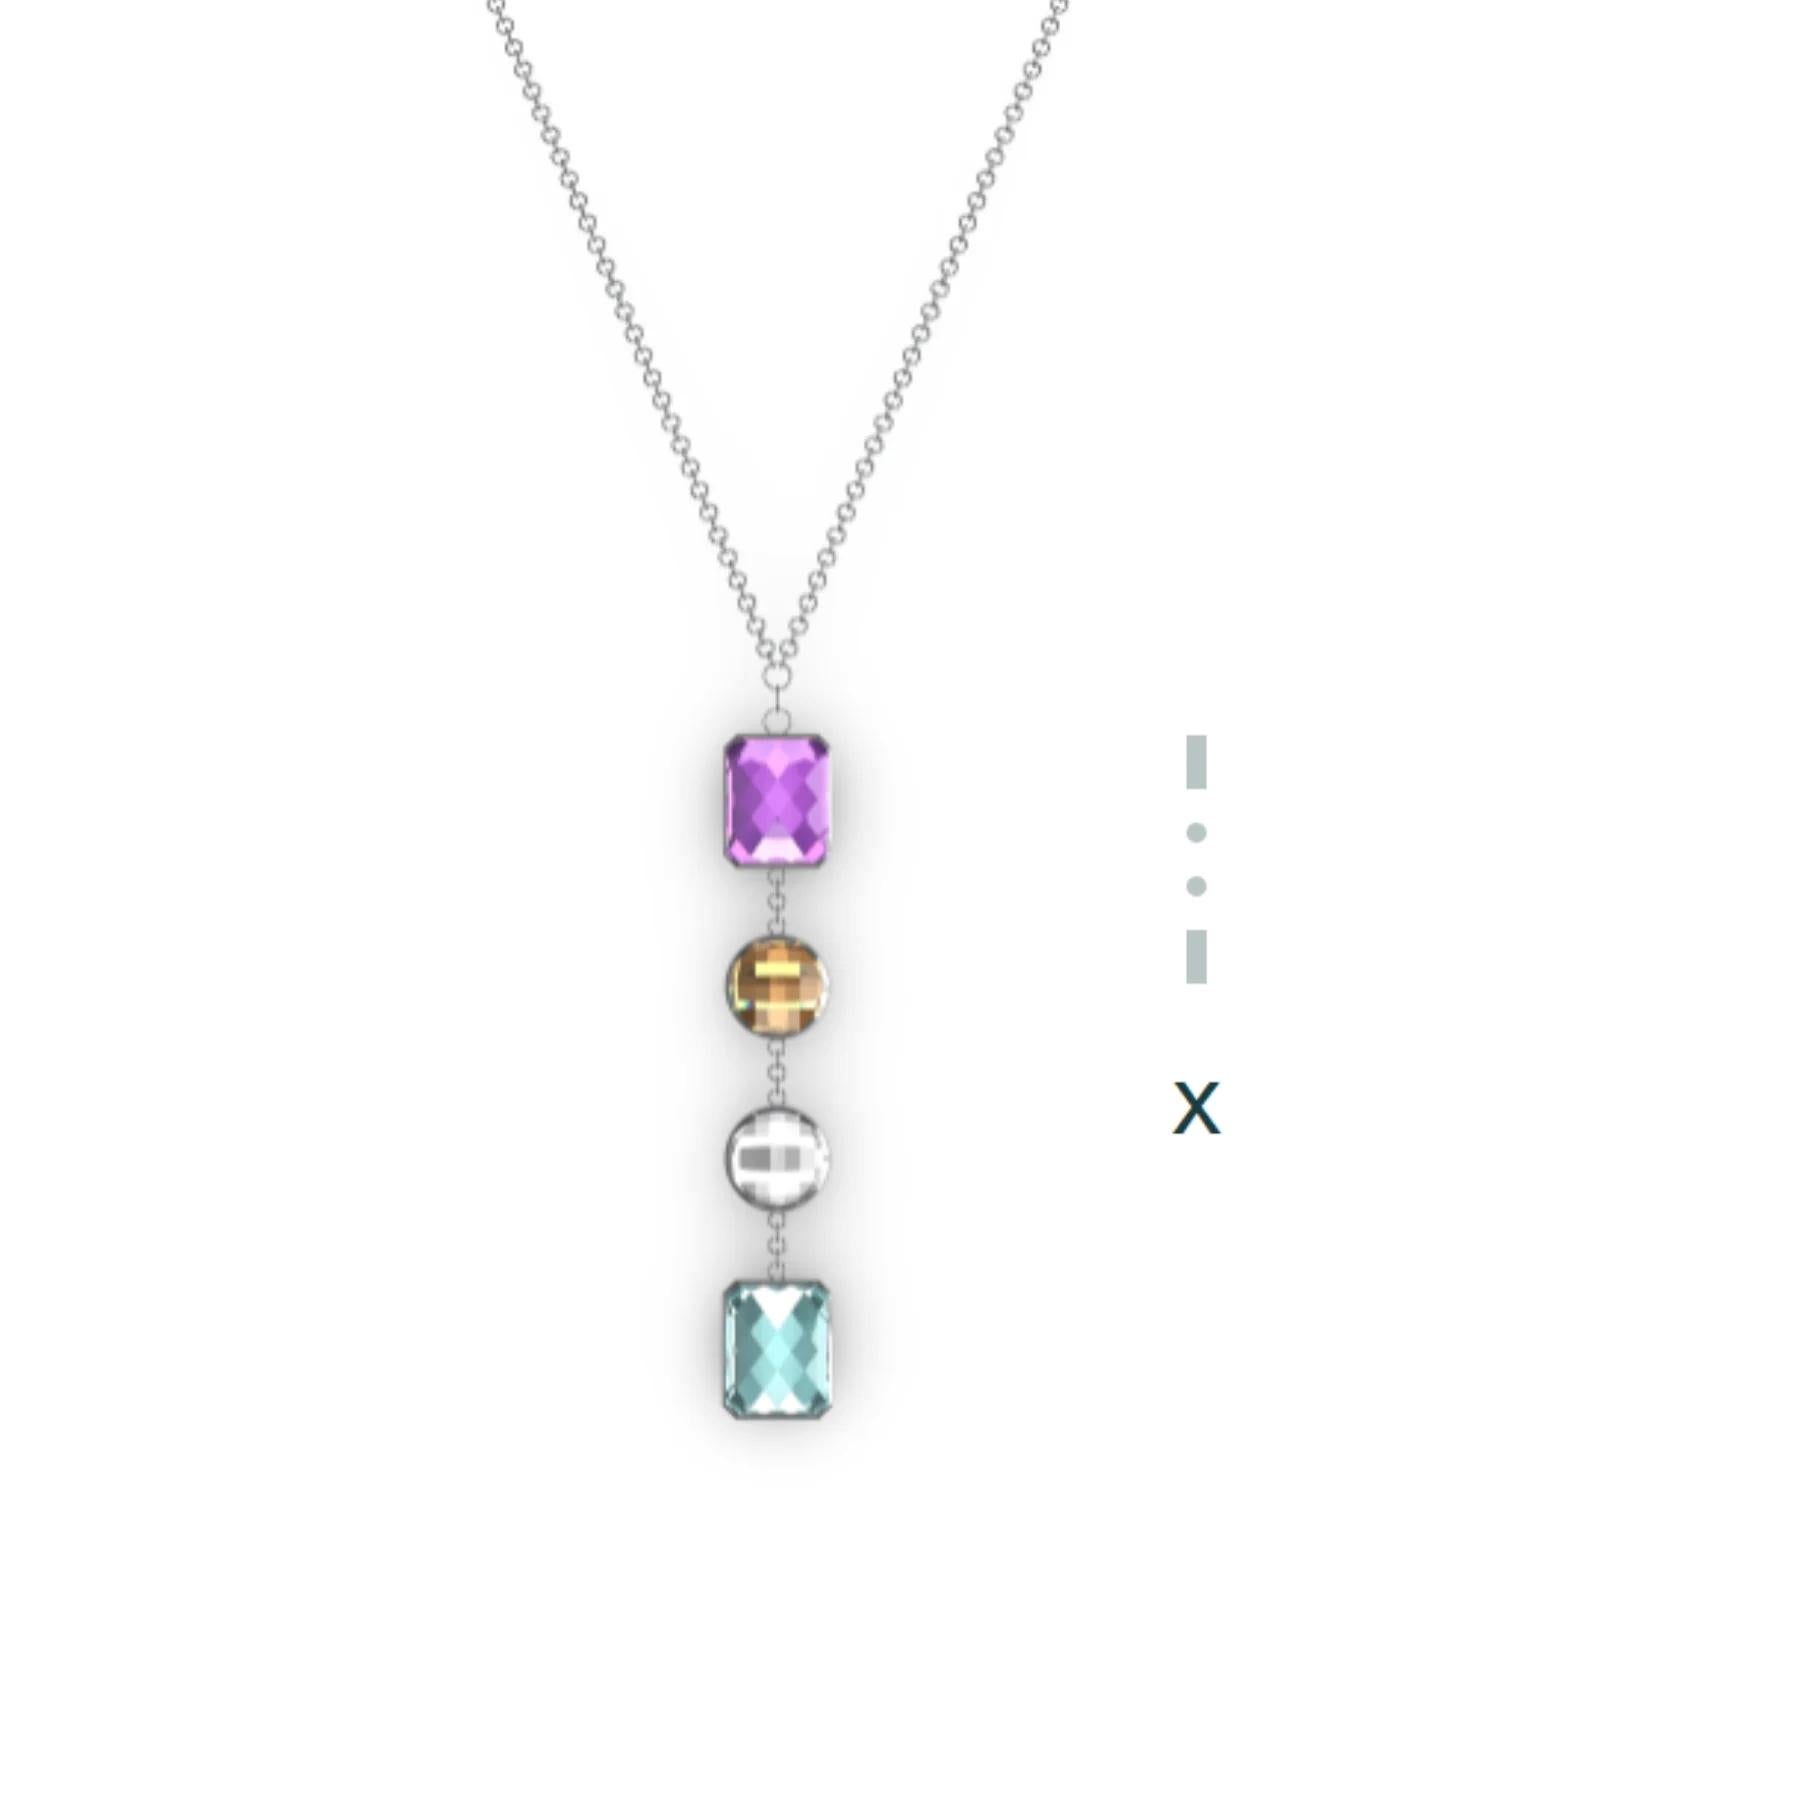 X is for XOXO… Encode the letters of your name, your children's initials, your lucky numbers, or a secret message of inspiration.

Details of this piece:
Handcrafted
Recycled 925 sterling silver

About Us
In the intricate dance of human connections,